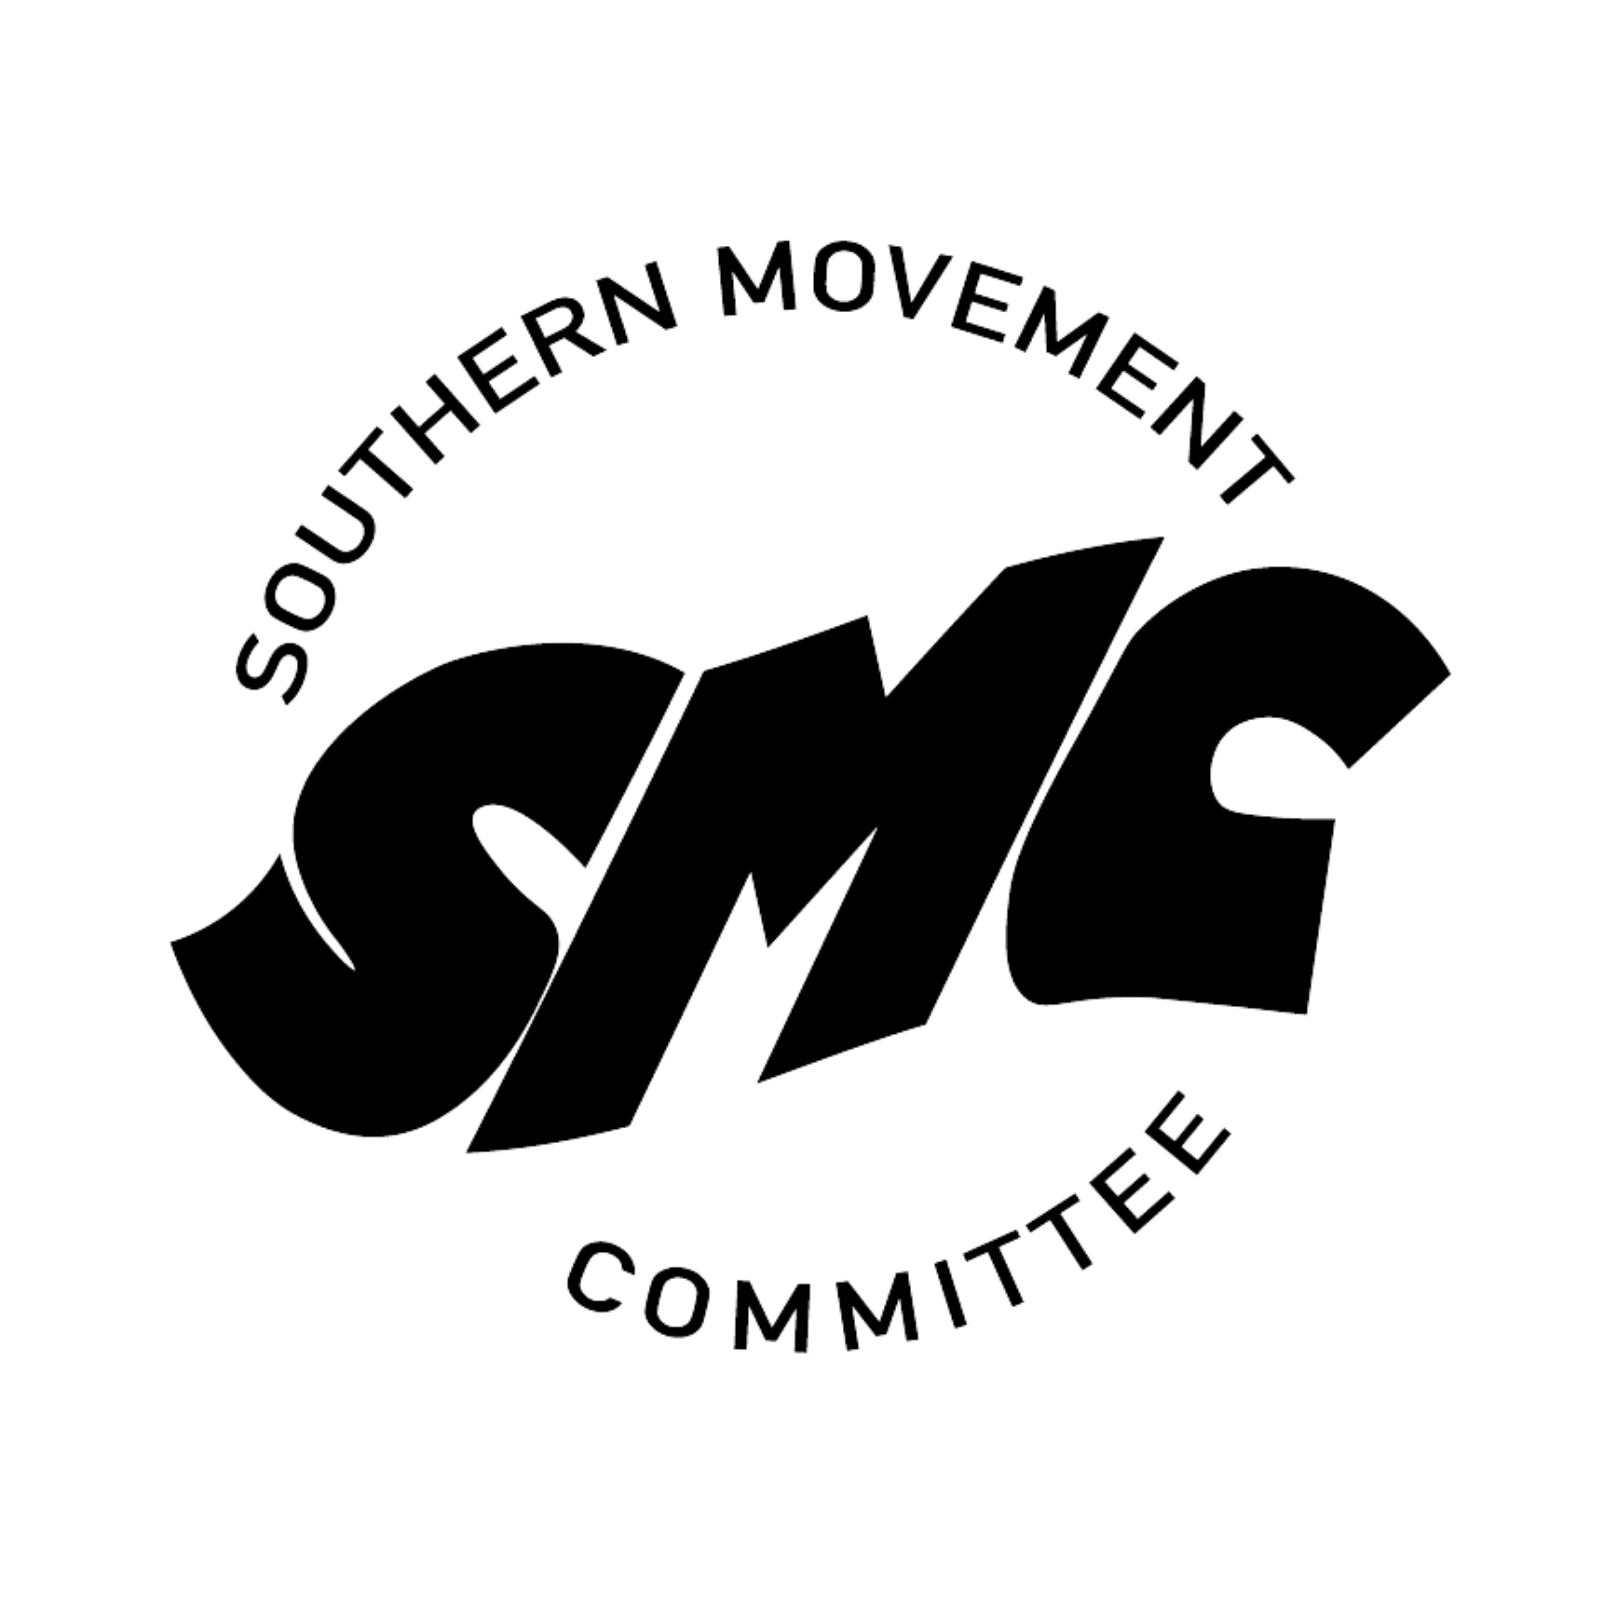 Southern Movement Committee logo